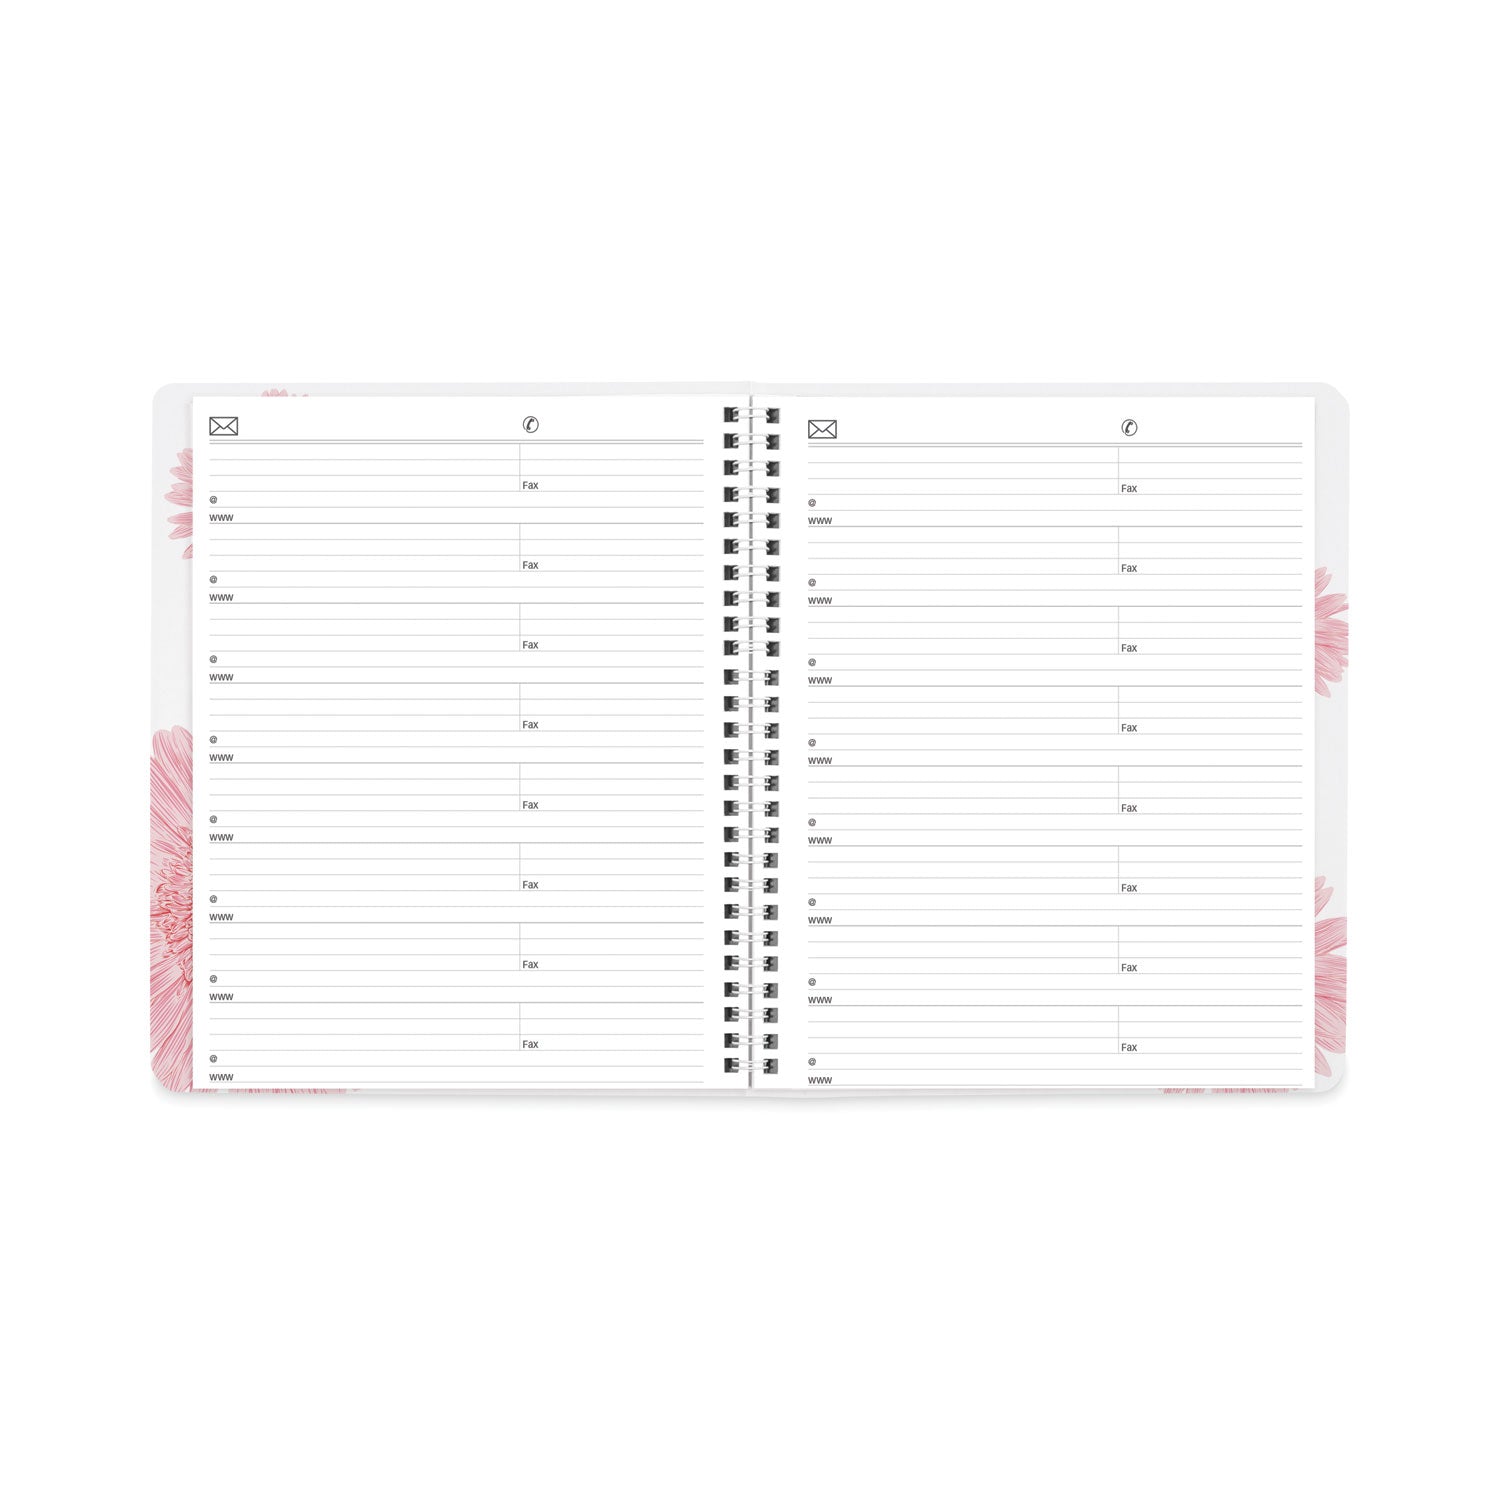 essential-collection-14-month-ruled-monthly-planner-888-x-713-daisy-black-pink-cover-14-month-dec-to-jan-2023-to-2025_redcb1200g05 - 4